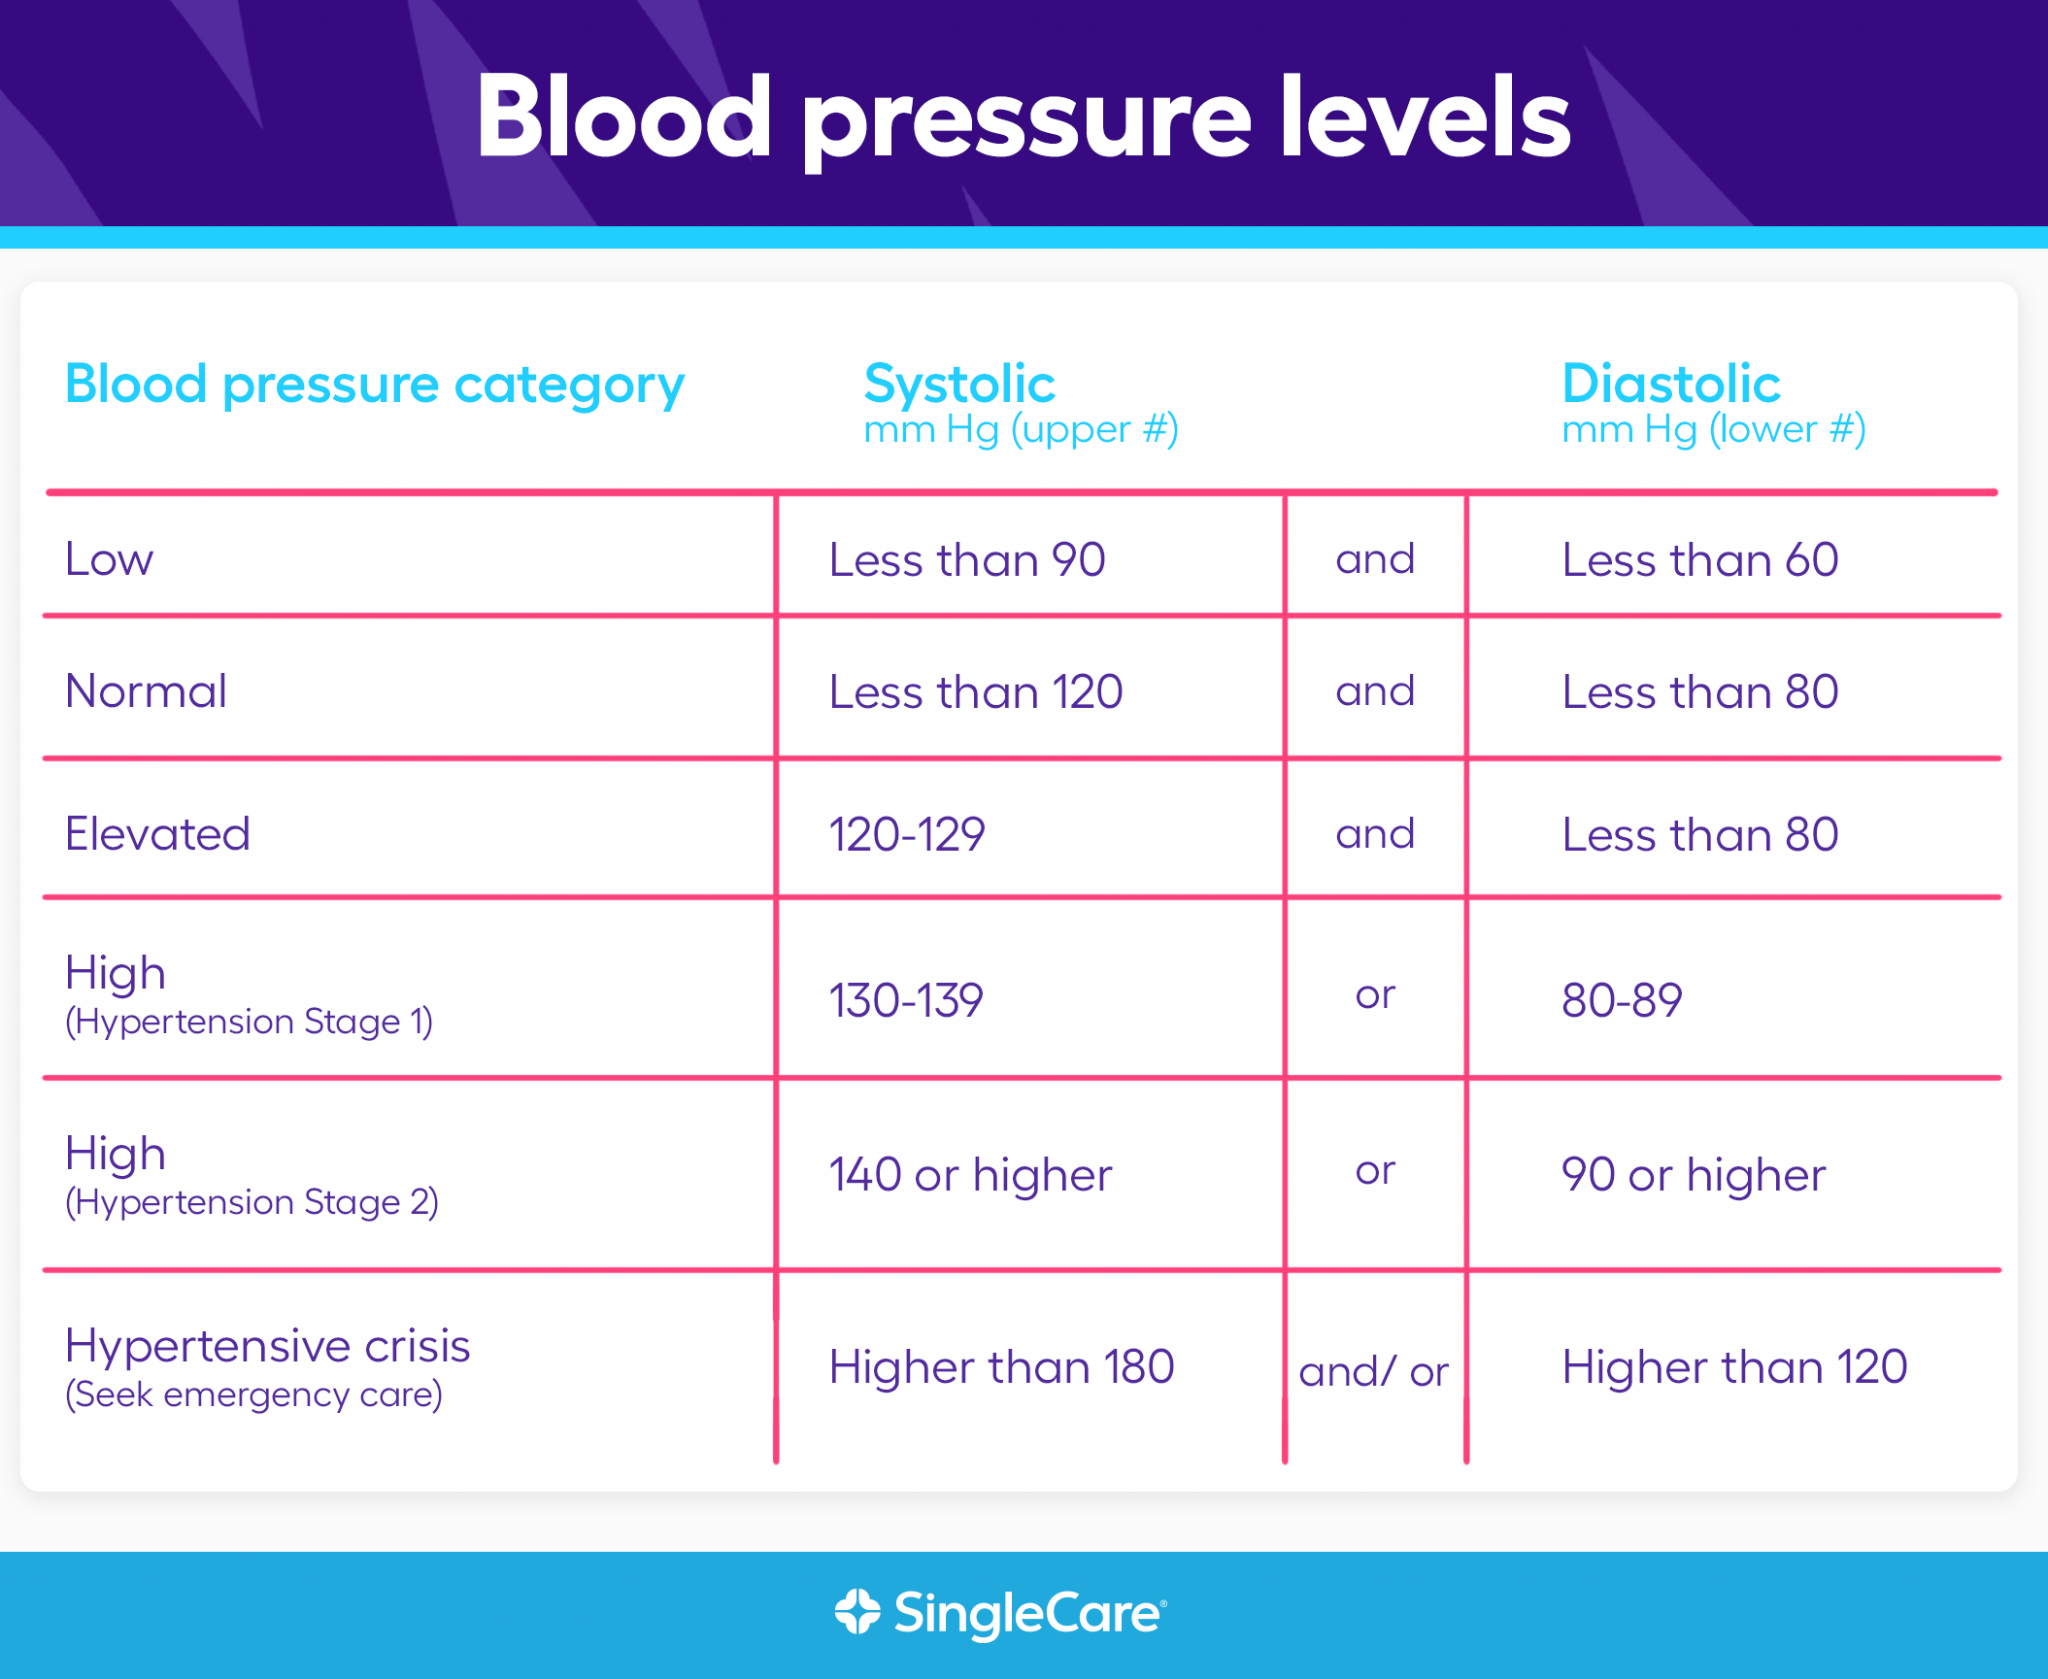 What Are Normal Blood Pressure Levels